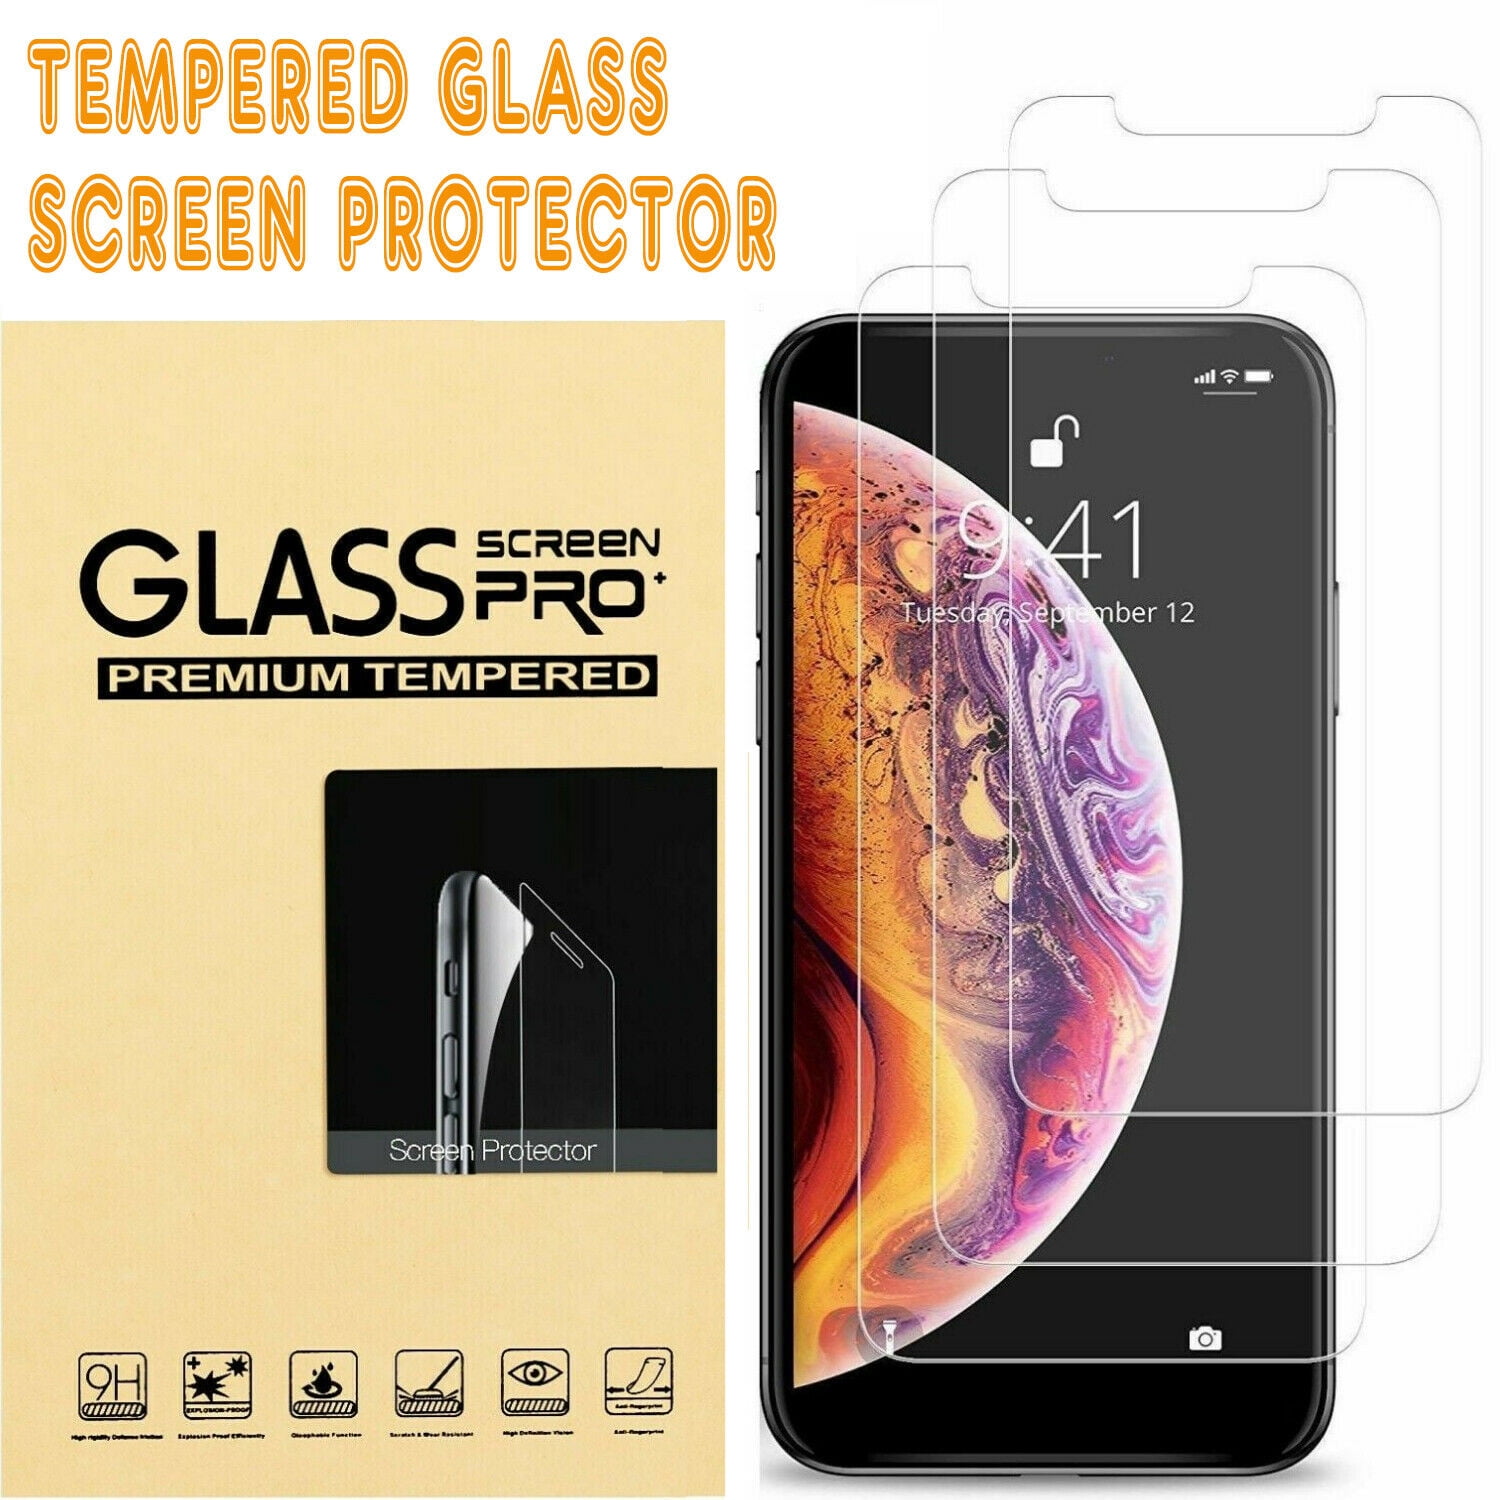 iPhone 11 Pro Max Tempered Glass Screen Protector 2 Pack